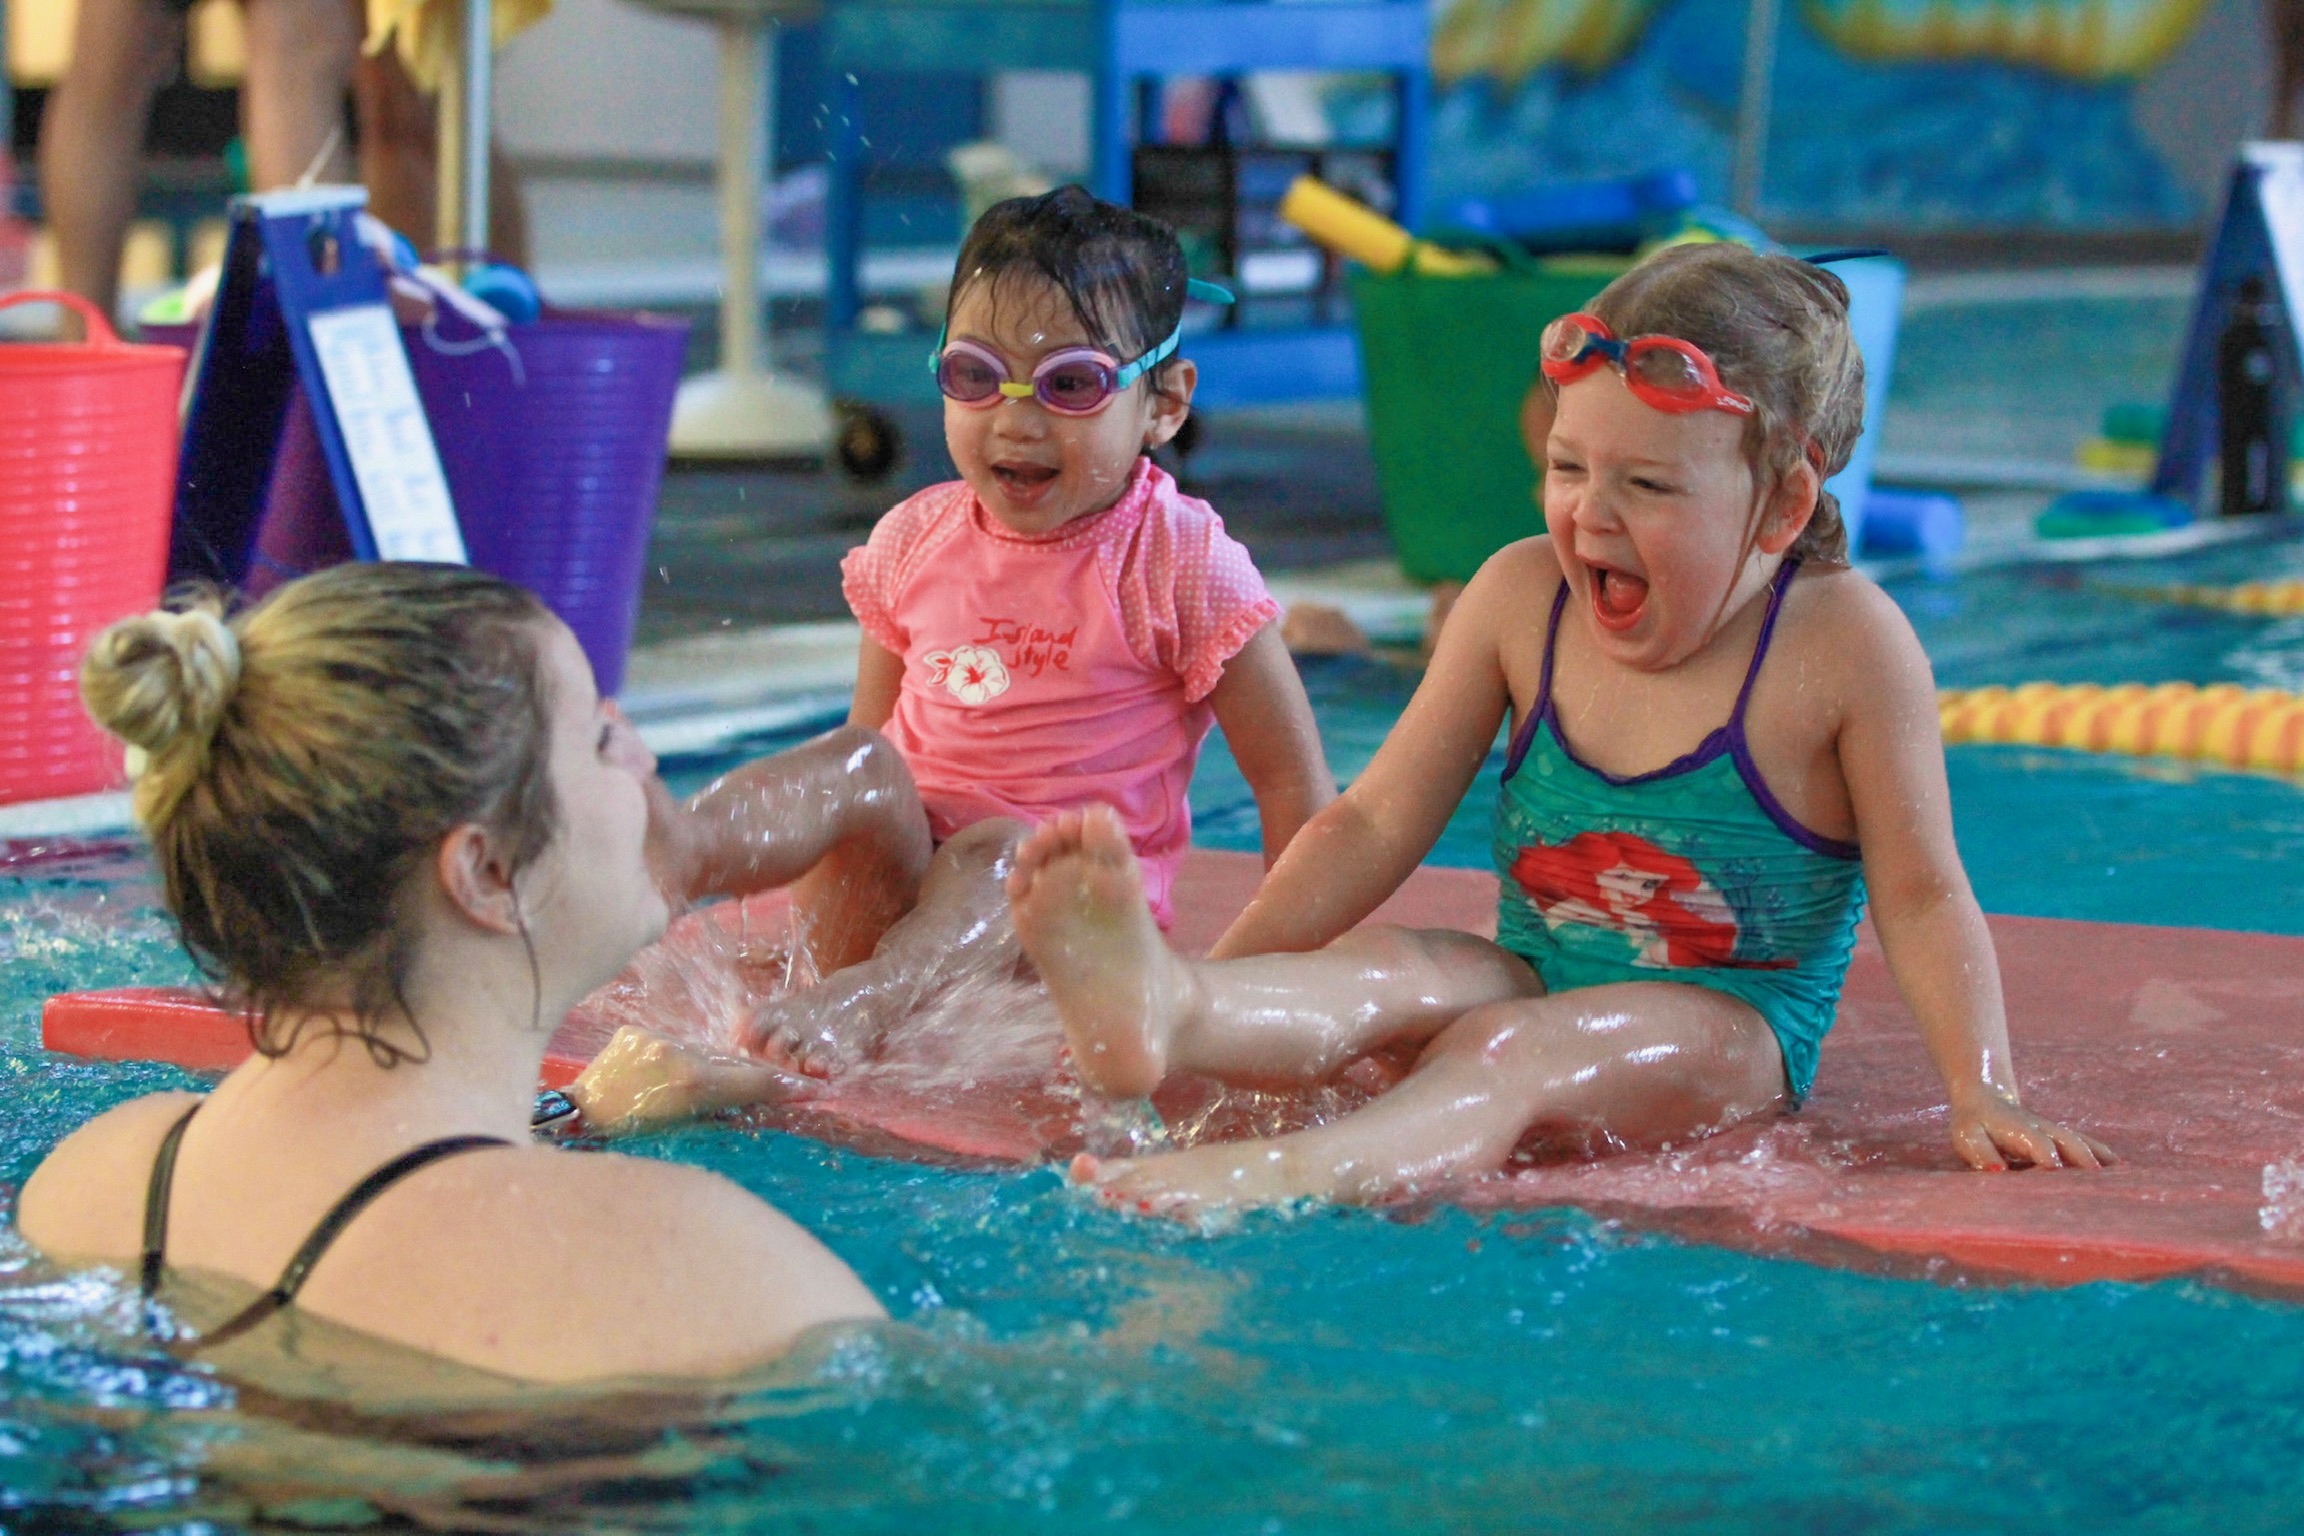 Students having fun learning to swim from energetic swim instructor